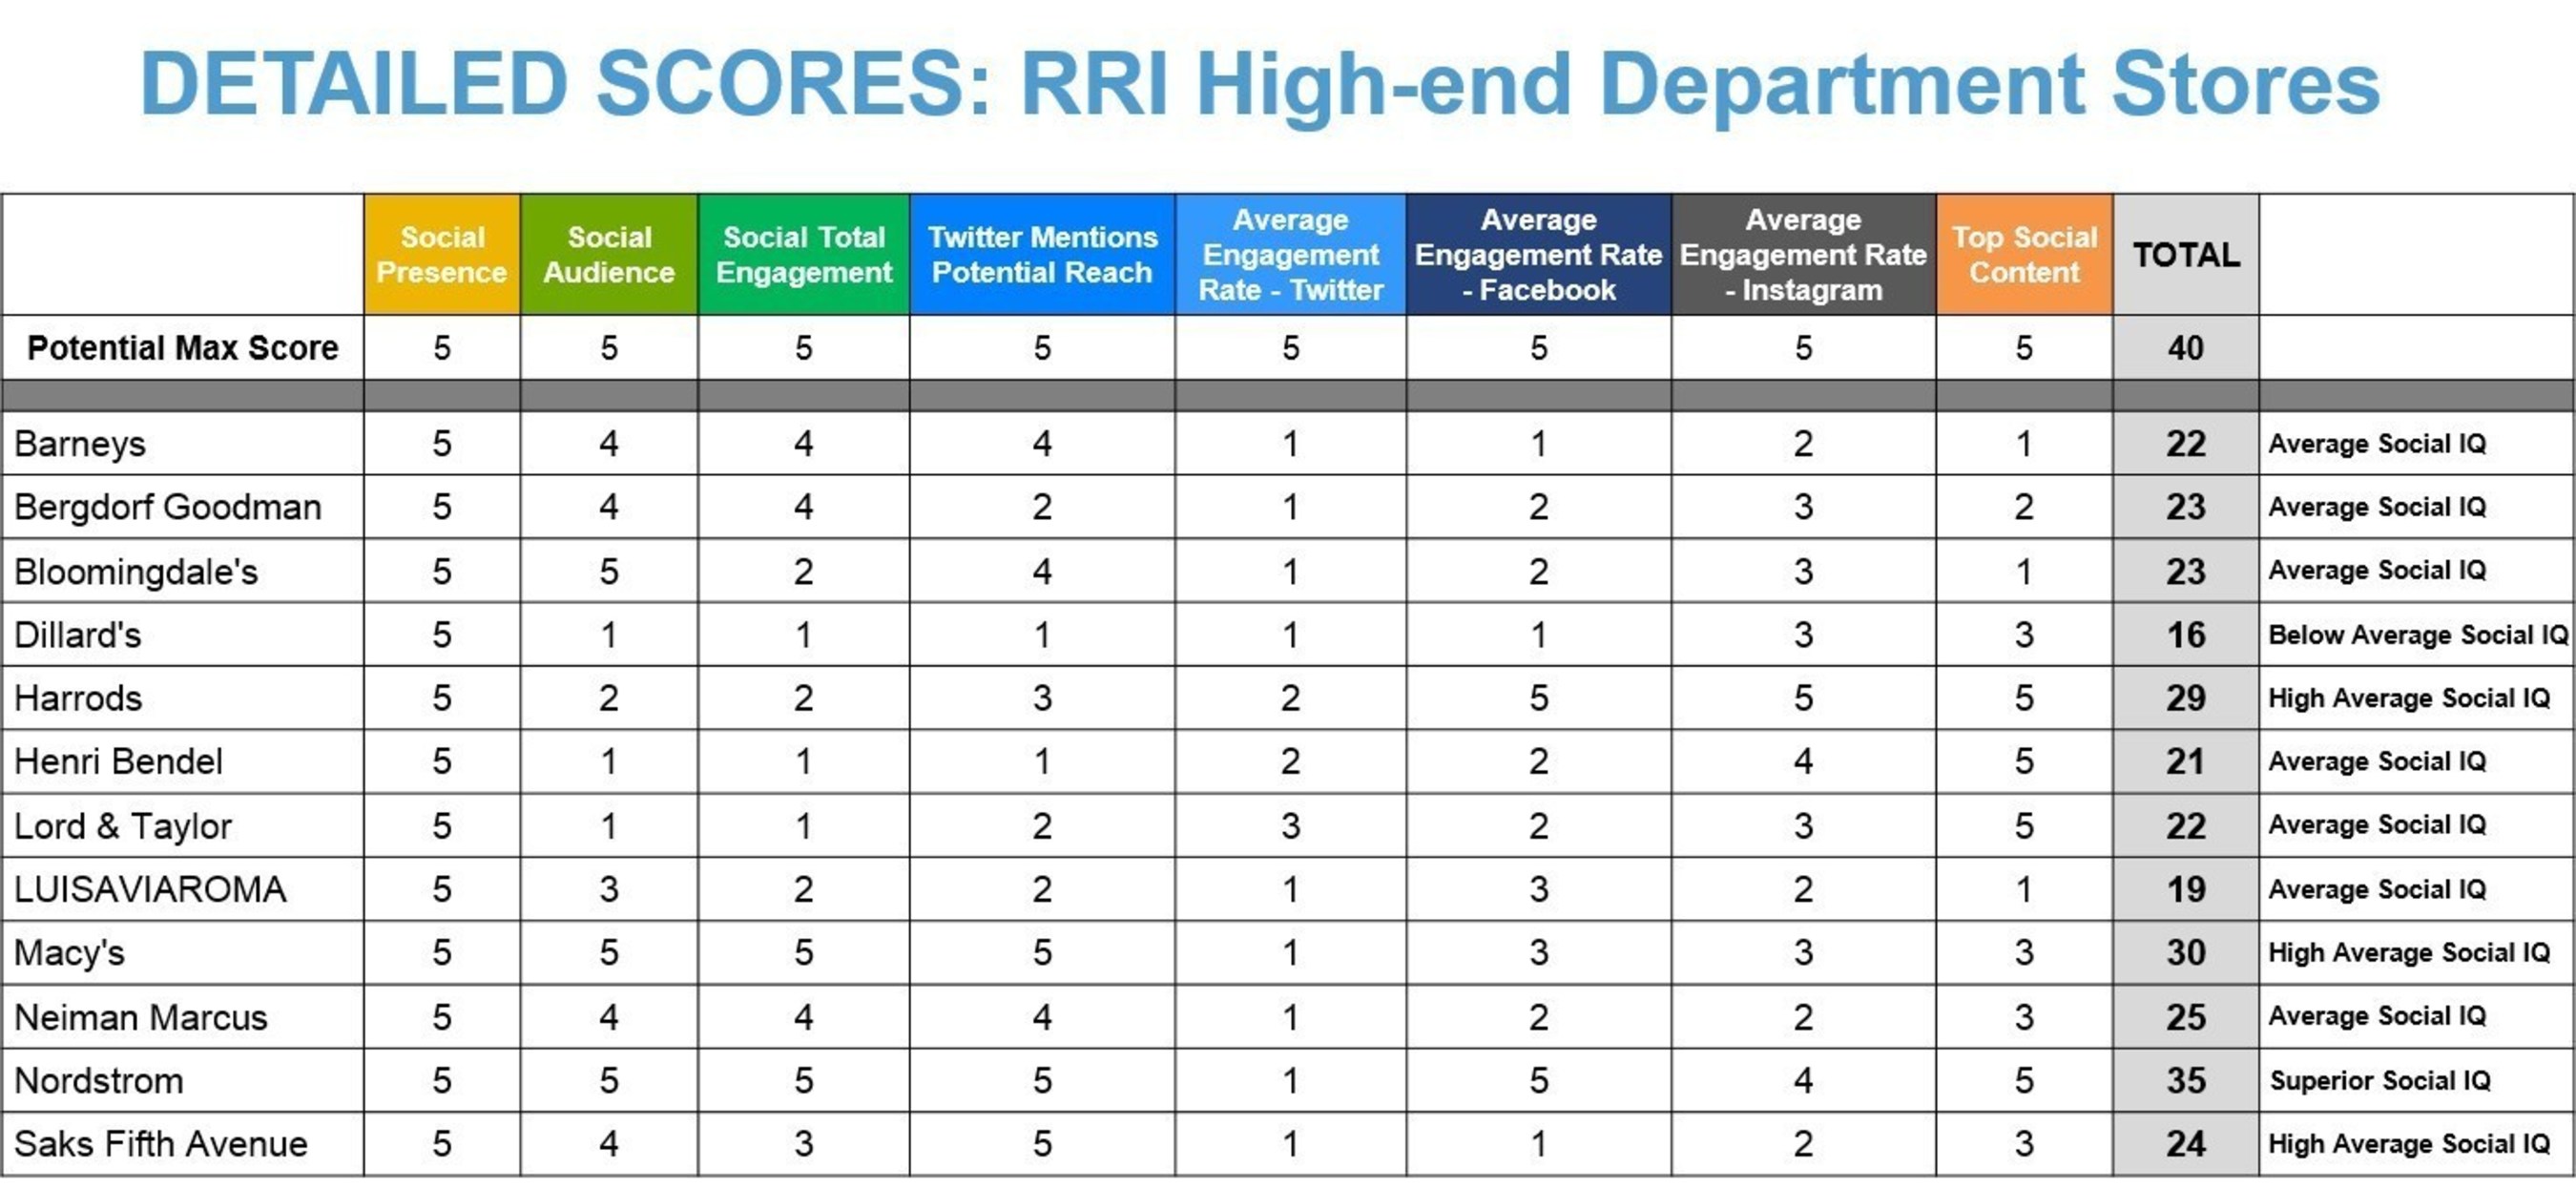 Detailed scorecard across all categories for the RRI High-end Department Store Q1 2015